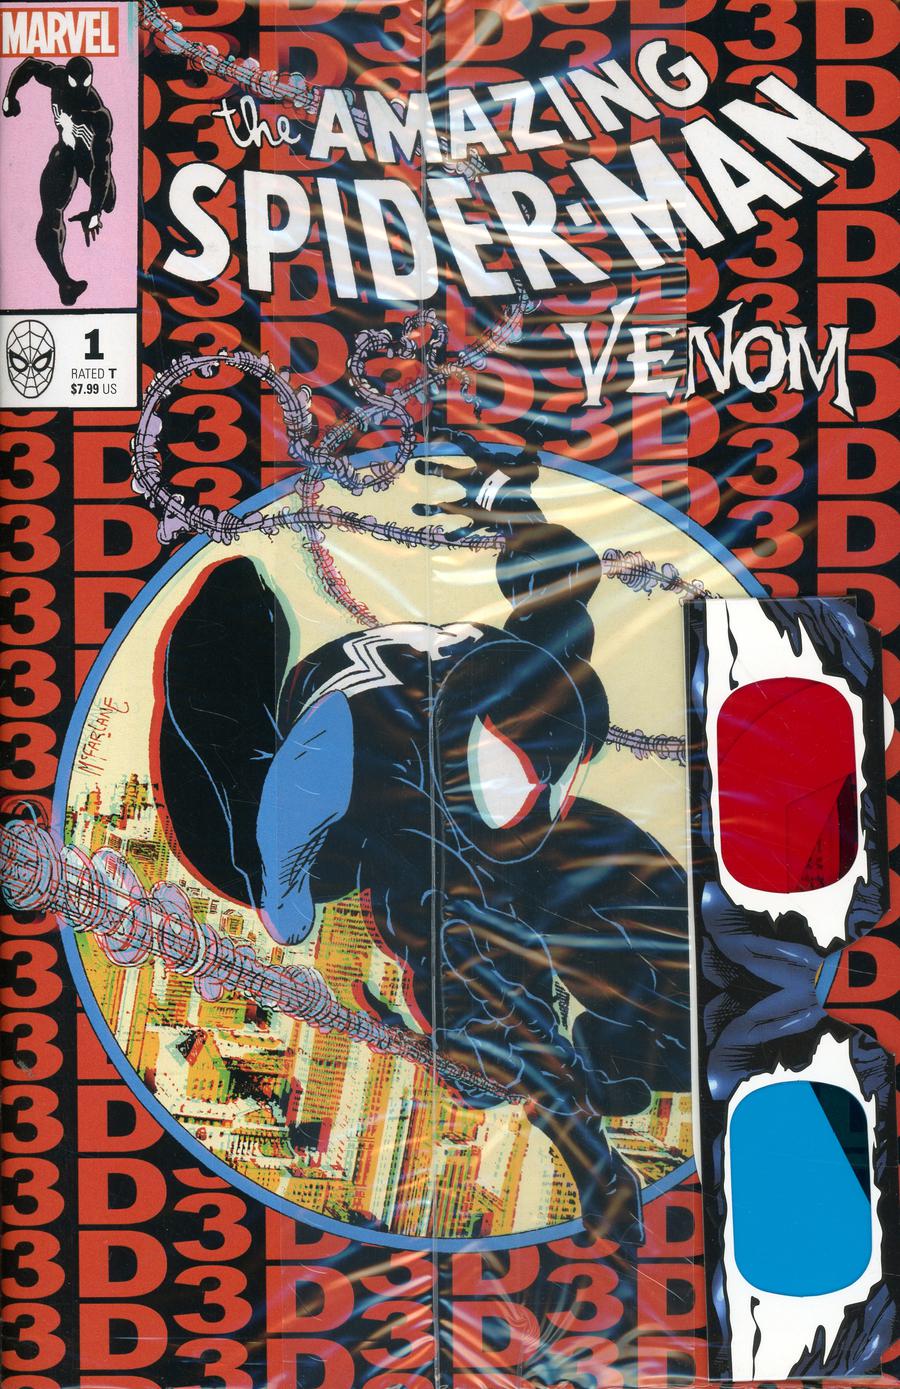 Amazing Spider-Man Venom 3D #1 Cover A With Polybag